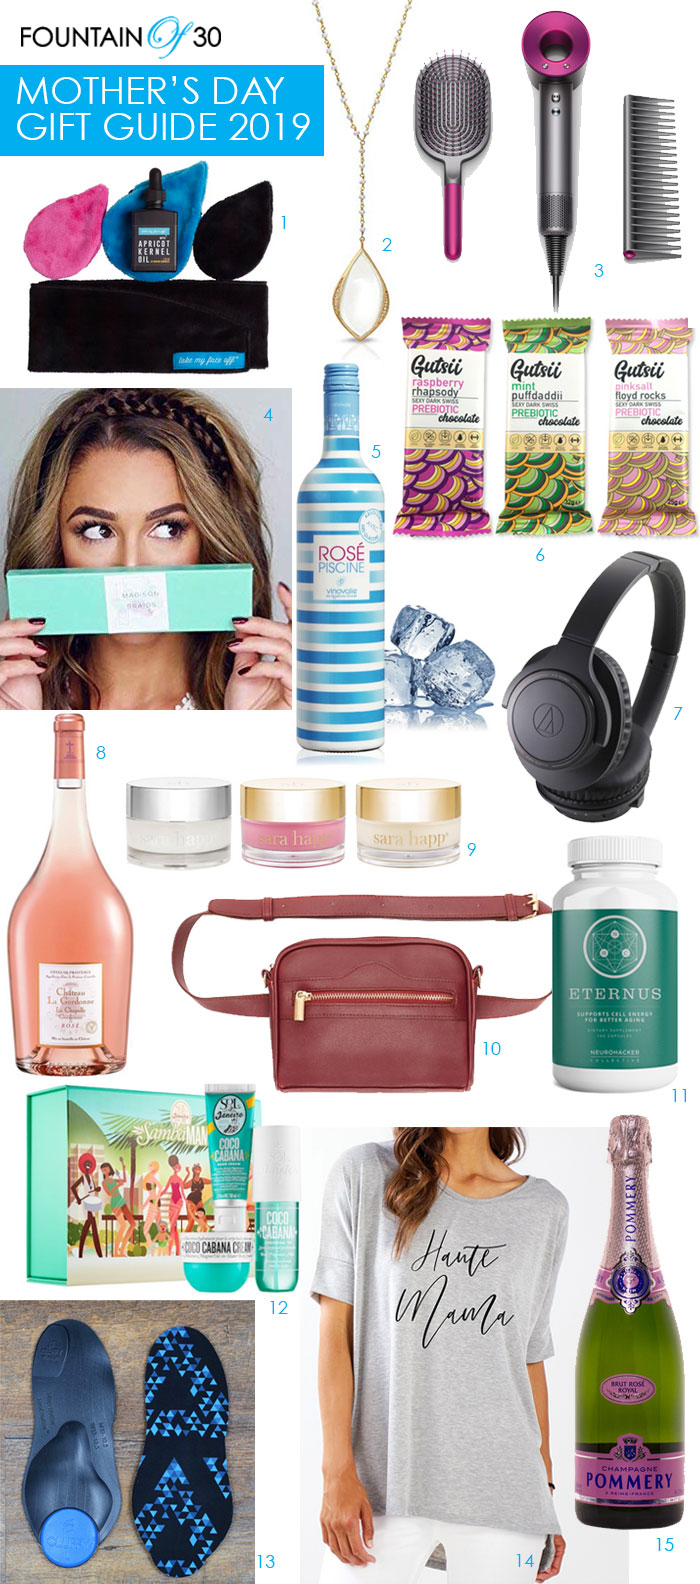 Unique Mother's Day Gift Ideas gifts for her fountainof30